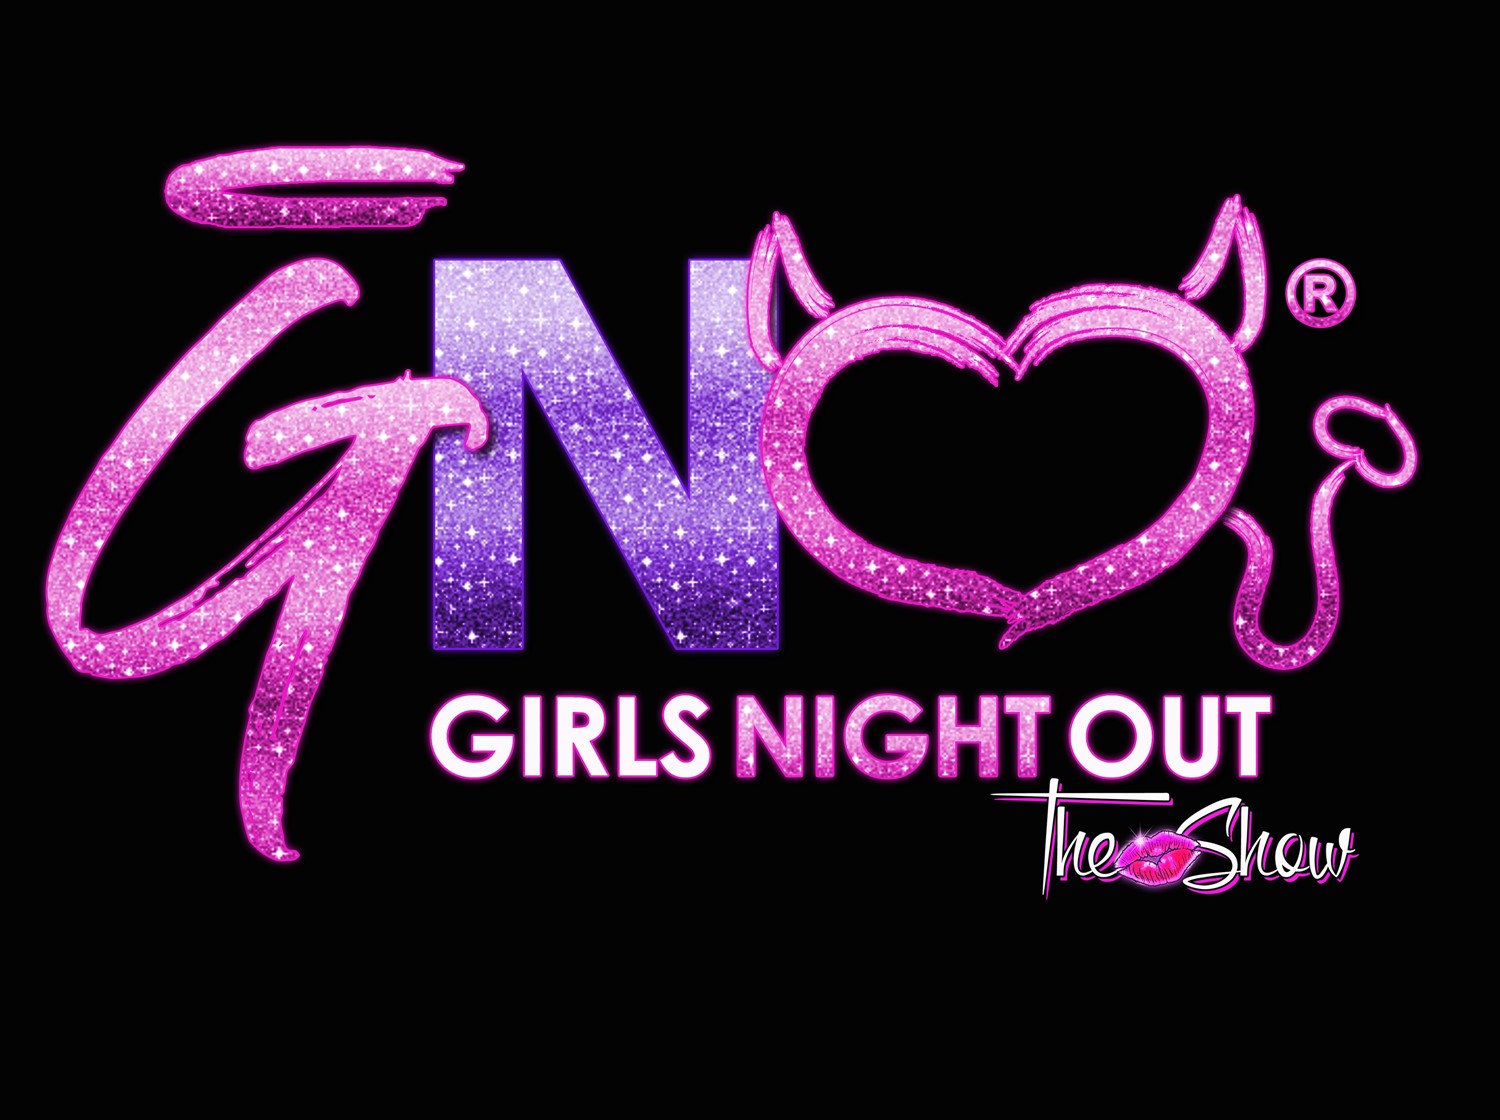 The TipsyTurtle (21+) Muskego, WI on May 30, 20:00@TipsyTurtle - Buy tickets and Get information on Girls Night Out the Show tickets.girlsnightouttheshow.com